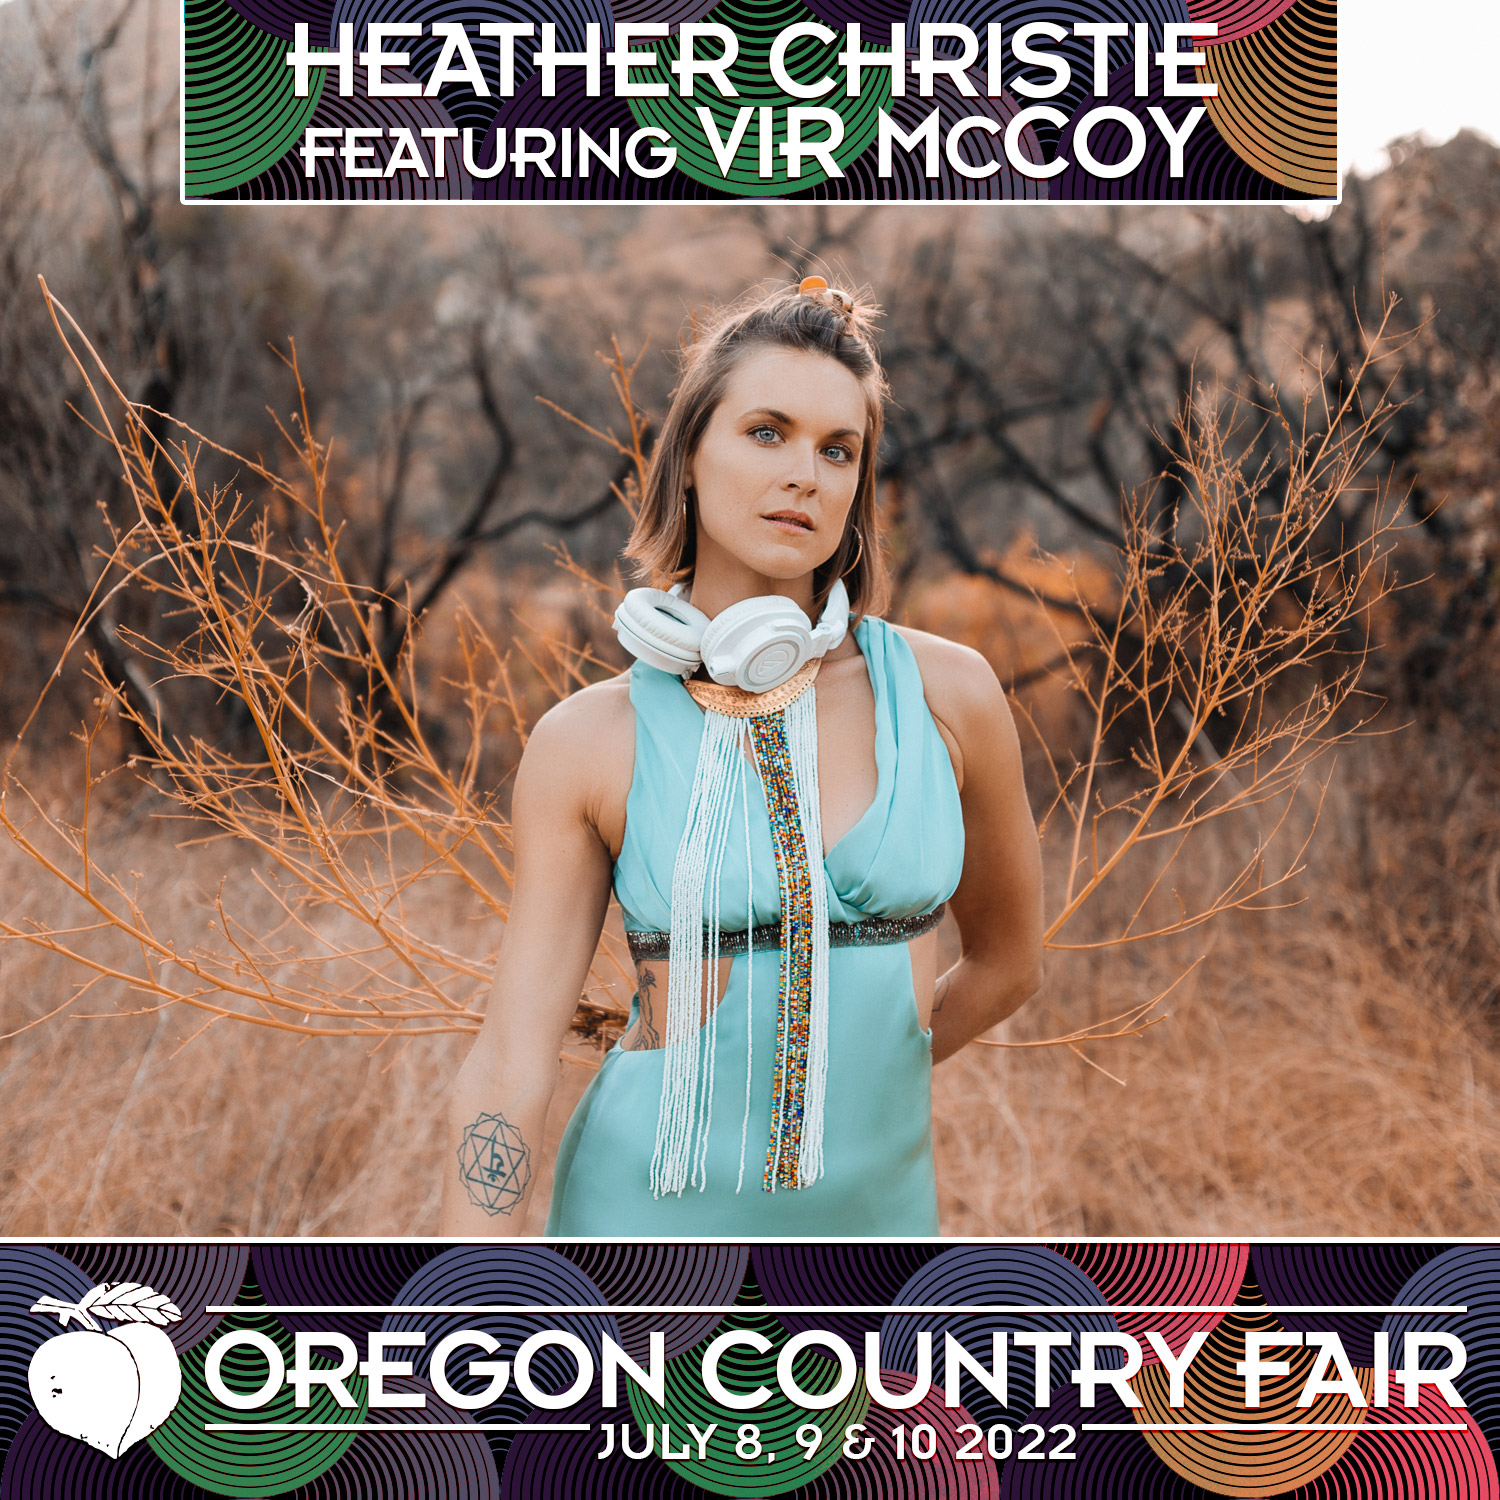 Photo of Heather Christie, with a caption including the text Heather Christie Featuring Vir McCoy, and a footer with text Oregon Country Fair, July 8, 9 & 10 2022